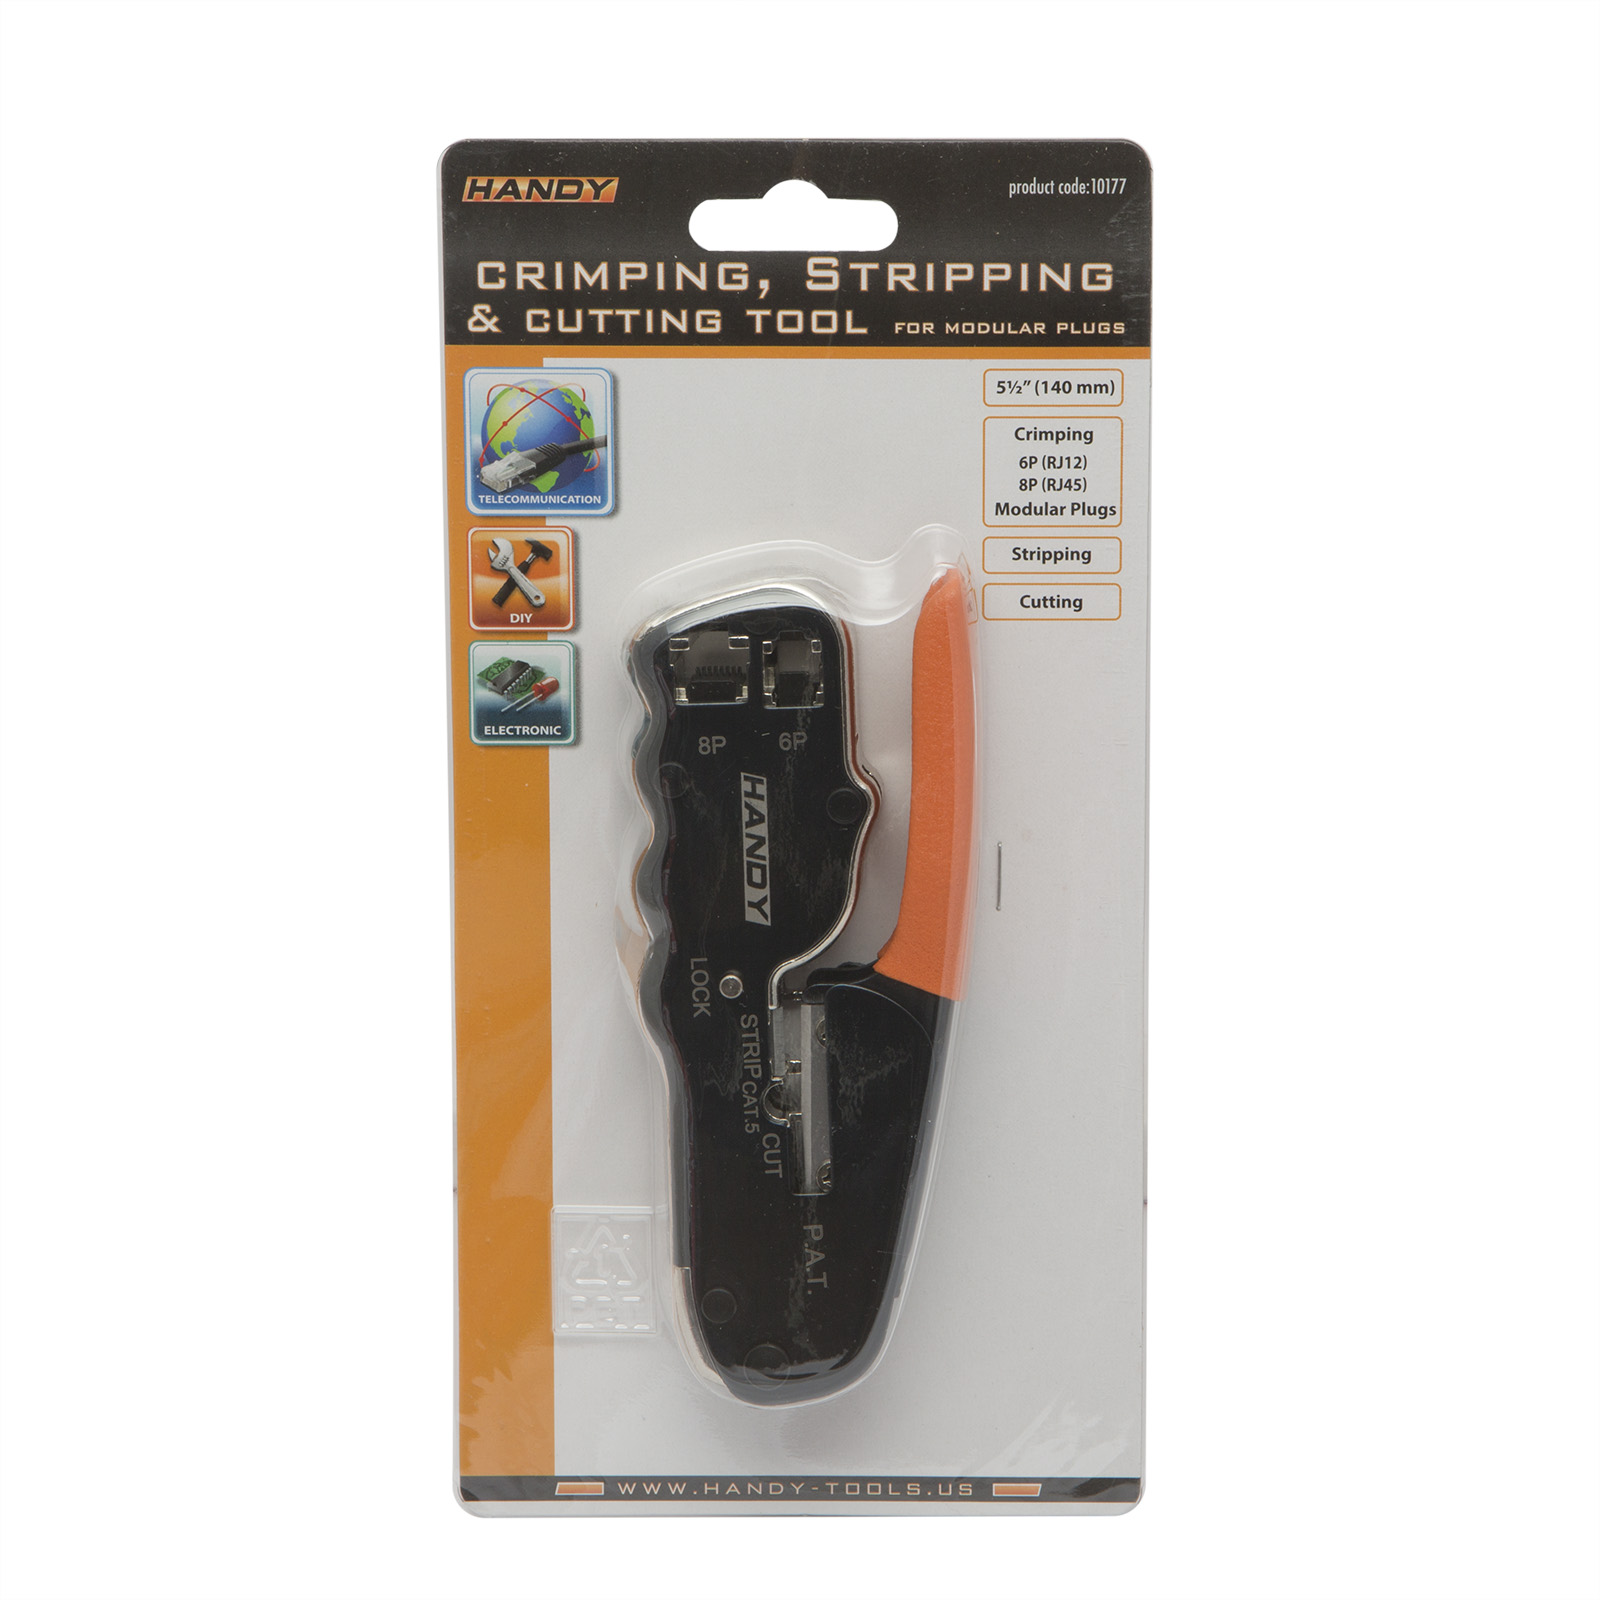 Crimping, Stripping and Cutting Tool thumb